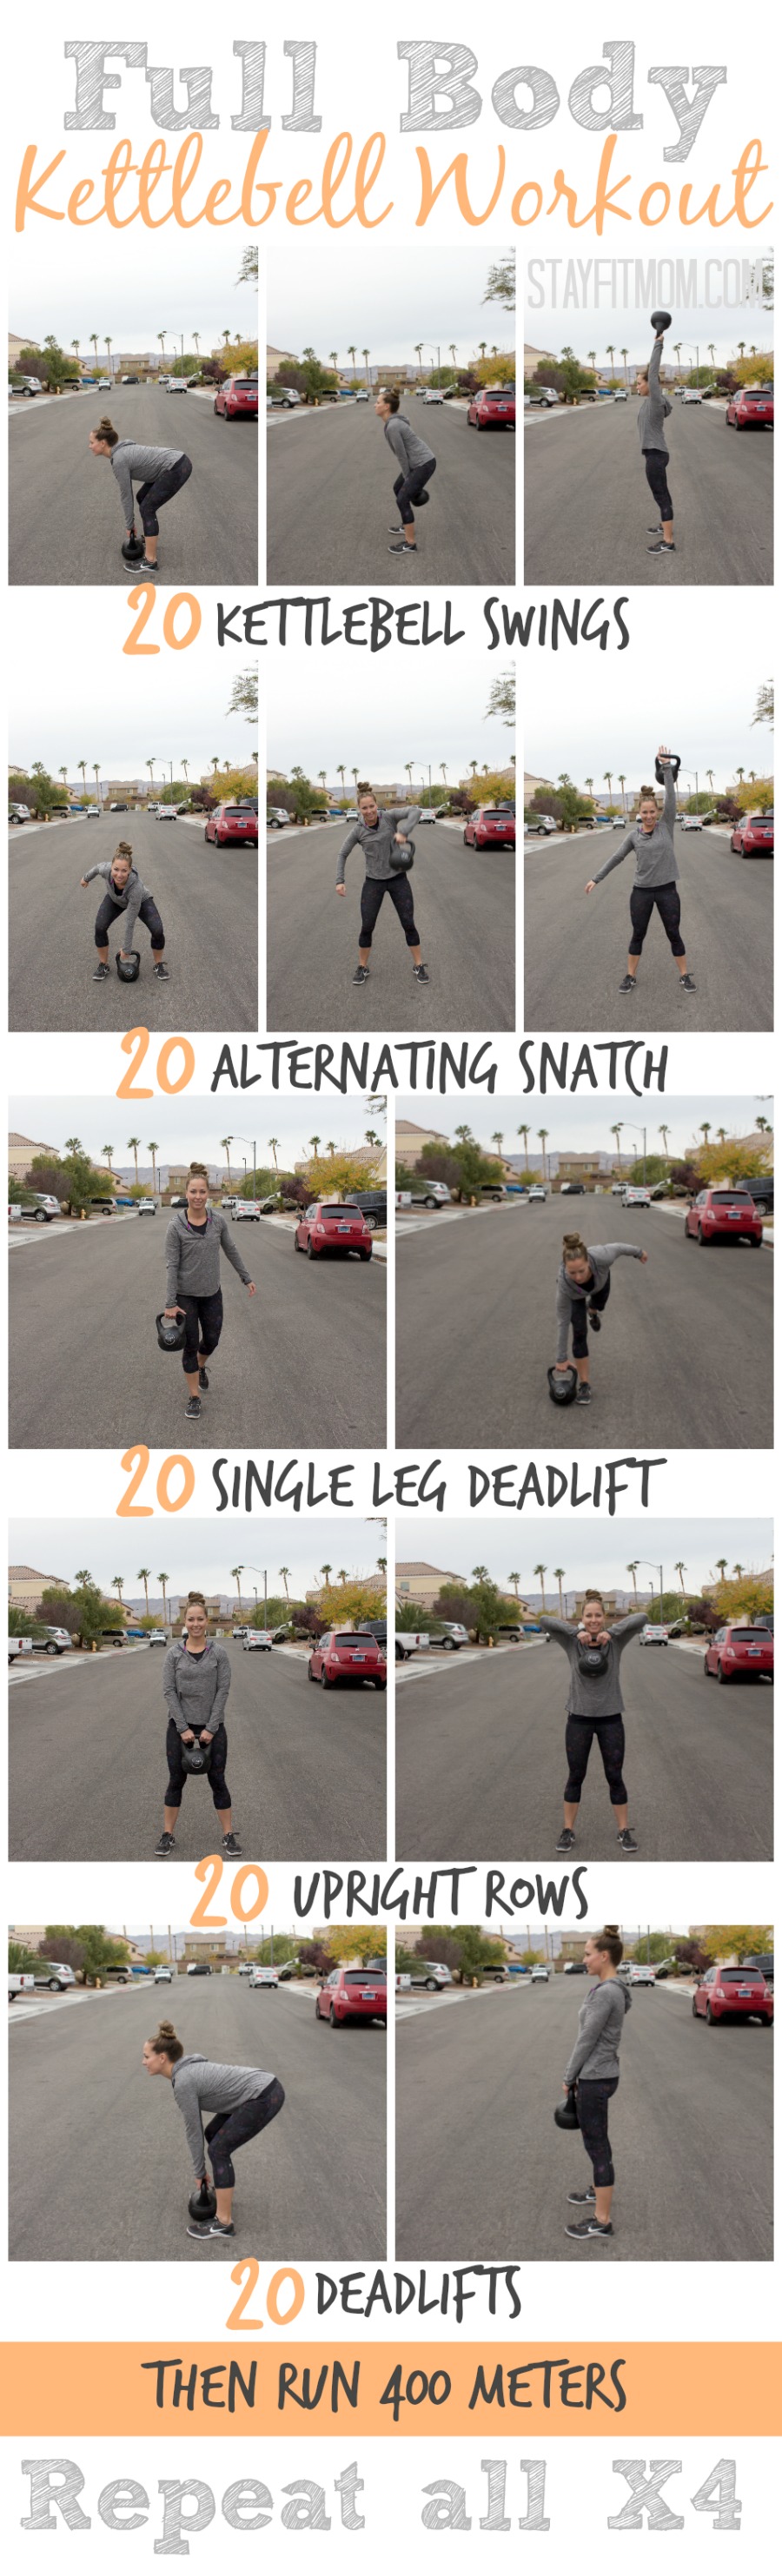 Free Home Workouts that require little equipment. Crossfit style and a lot of fun!